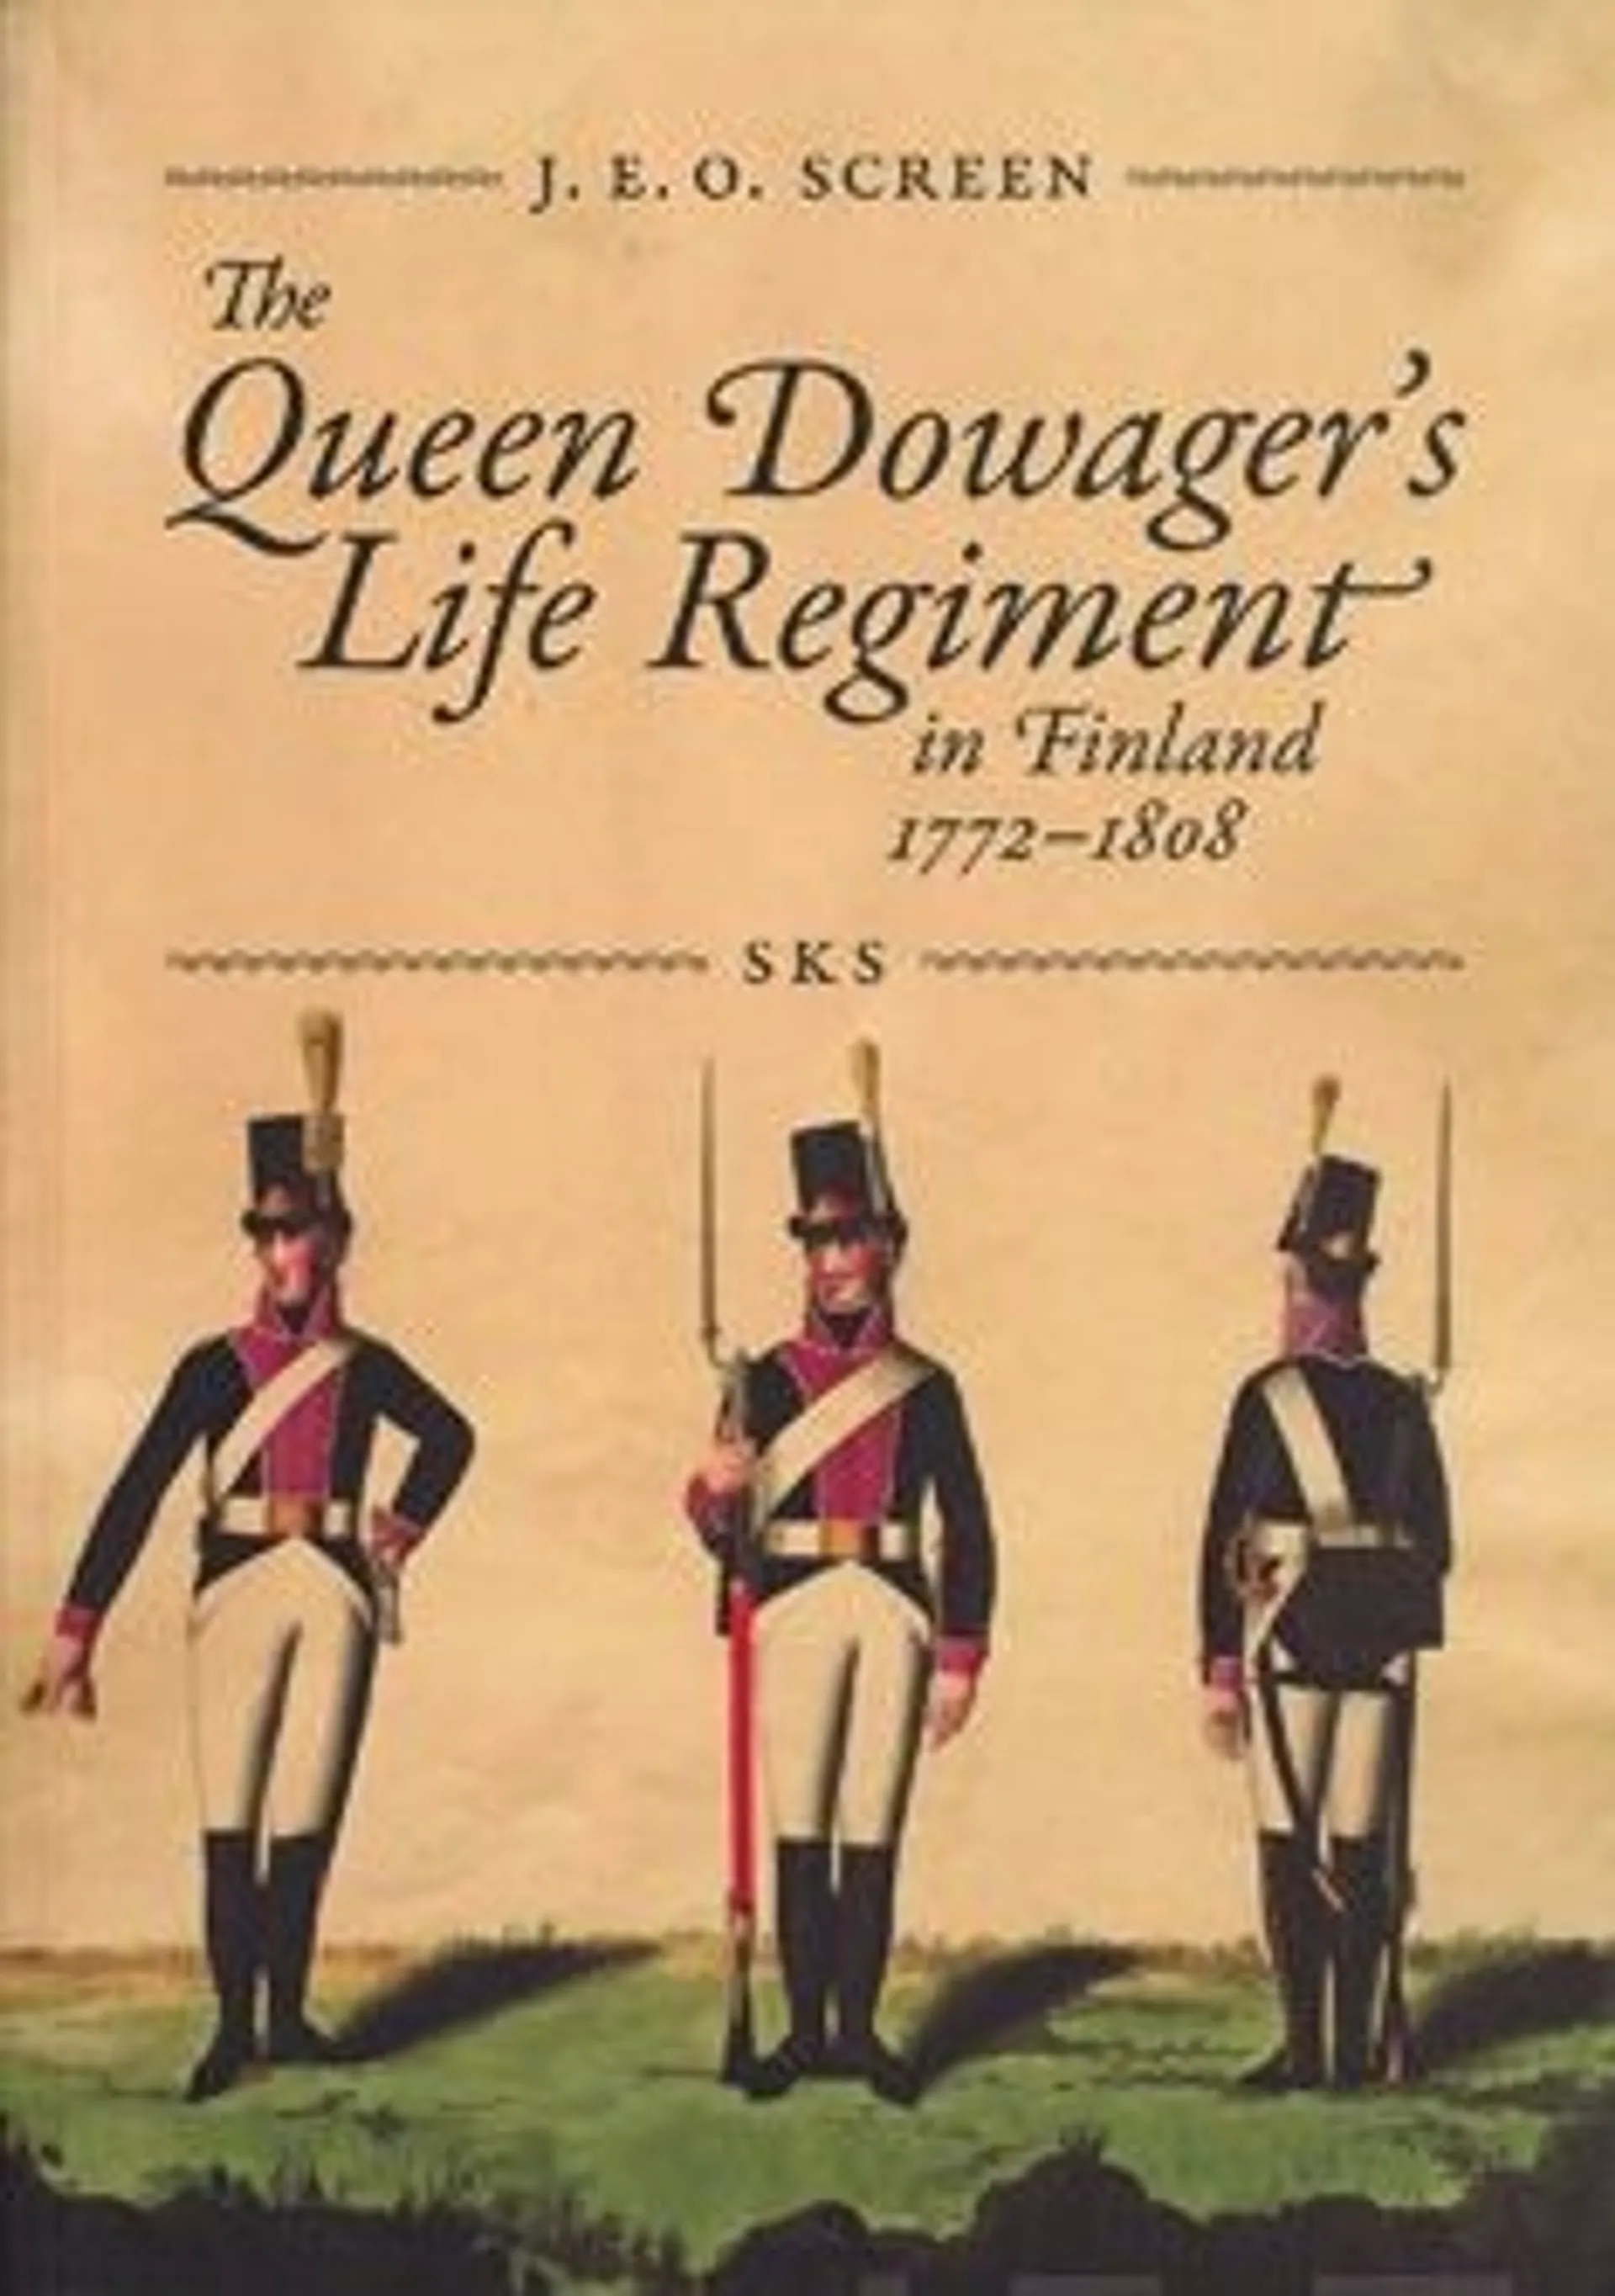 Screen, The Queen Dowager's Life Regiment in Finland 1772-1808